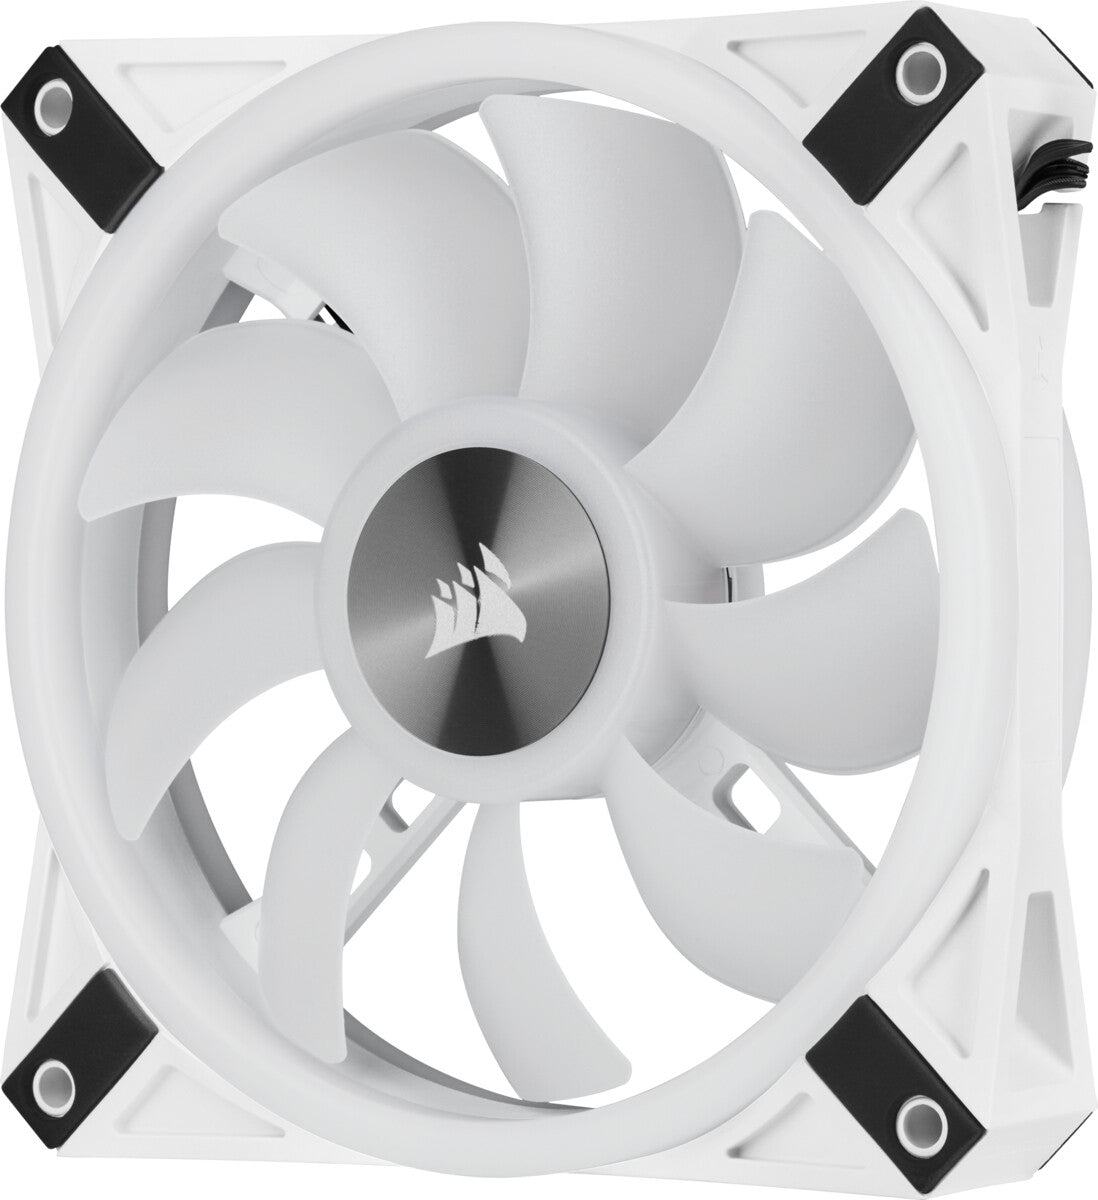 Corsair iCUE QL120 - Computer Case Fan in White - 120mm (Pack of 3)